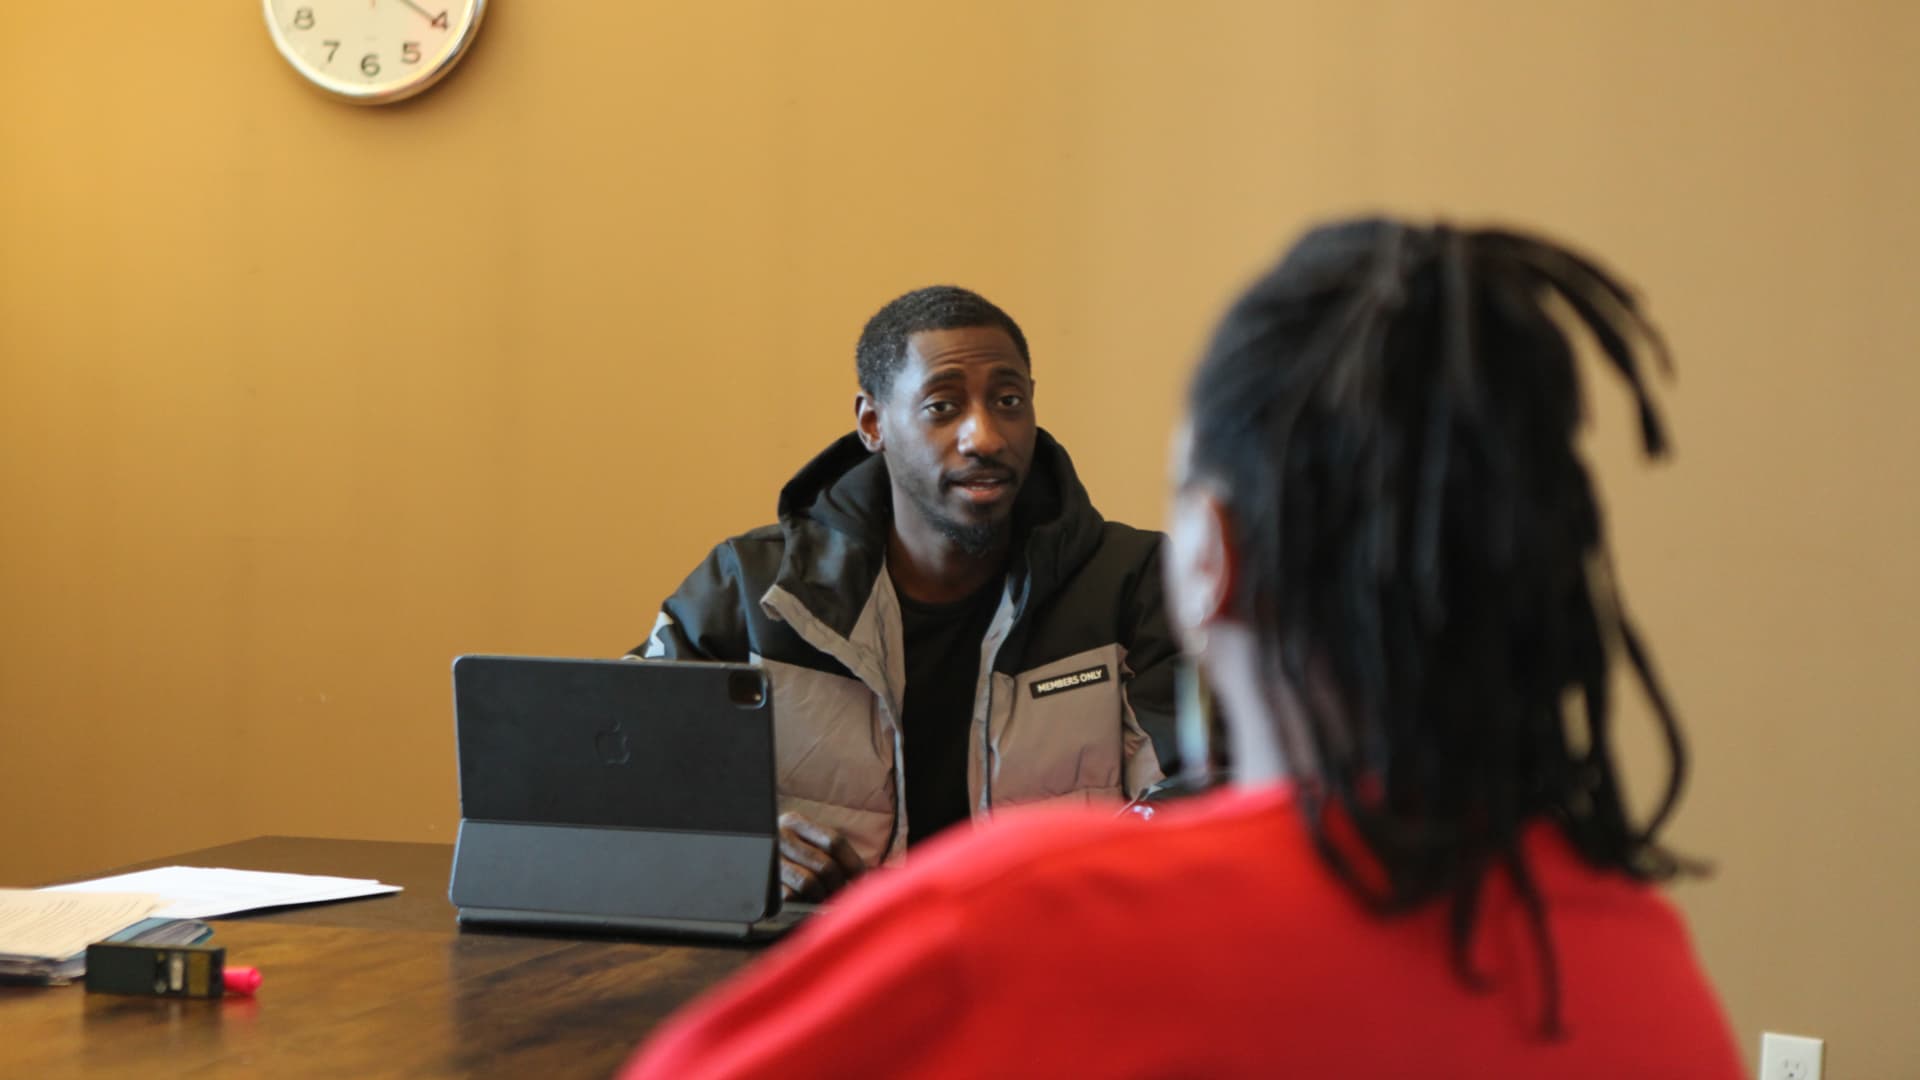 Tahir Johnson interviews a prospective employee ahead of his dispensary's opening next month. His goal is to 45 employees for part time and full time roles.